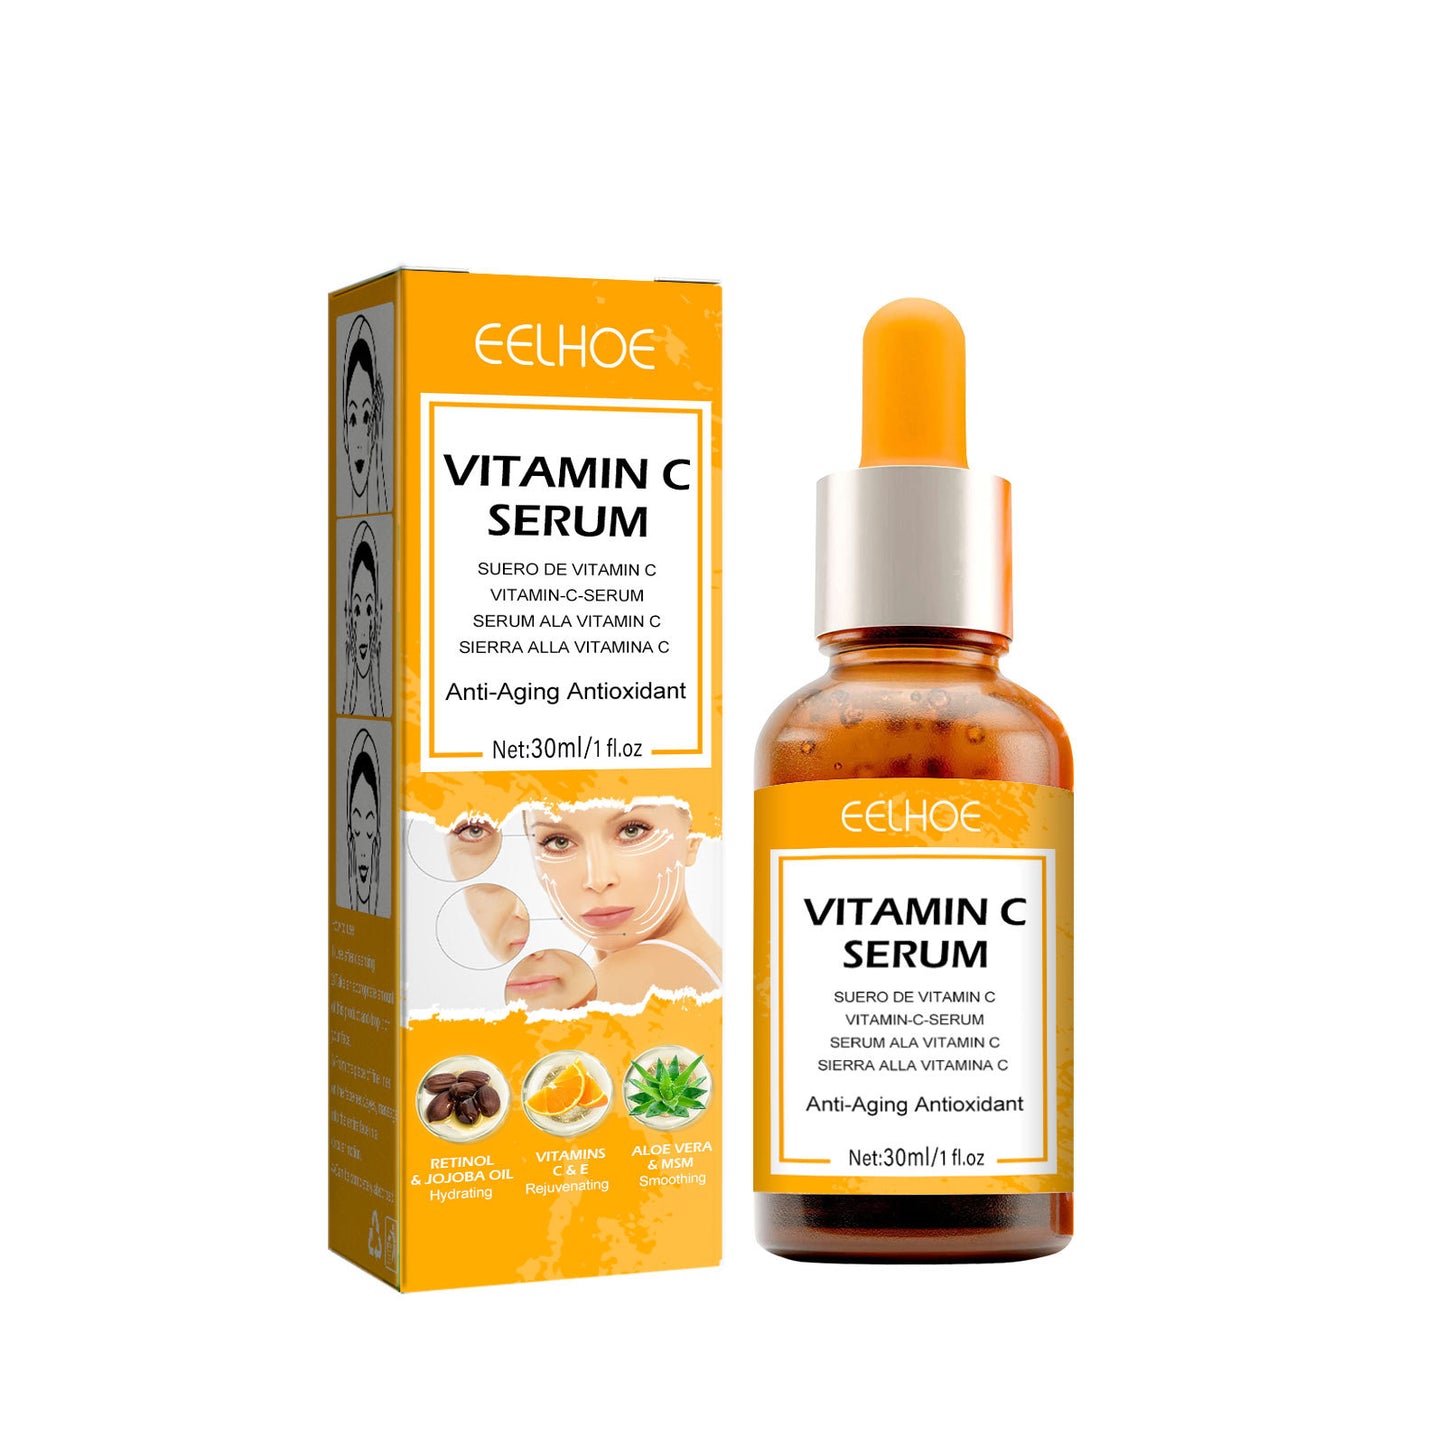 EELHOE Anti Aging Vitamin C Serum for Face Skin Purifying Essence Lifting Fine Line Improve Roughness Antioxidant Wrinkle Removal Serum(30ml)